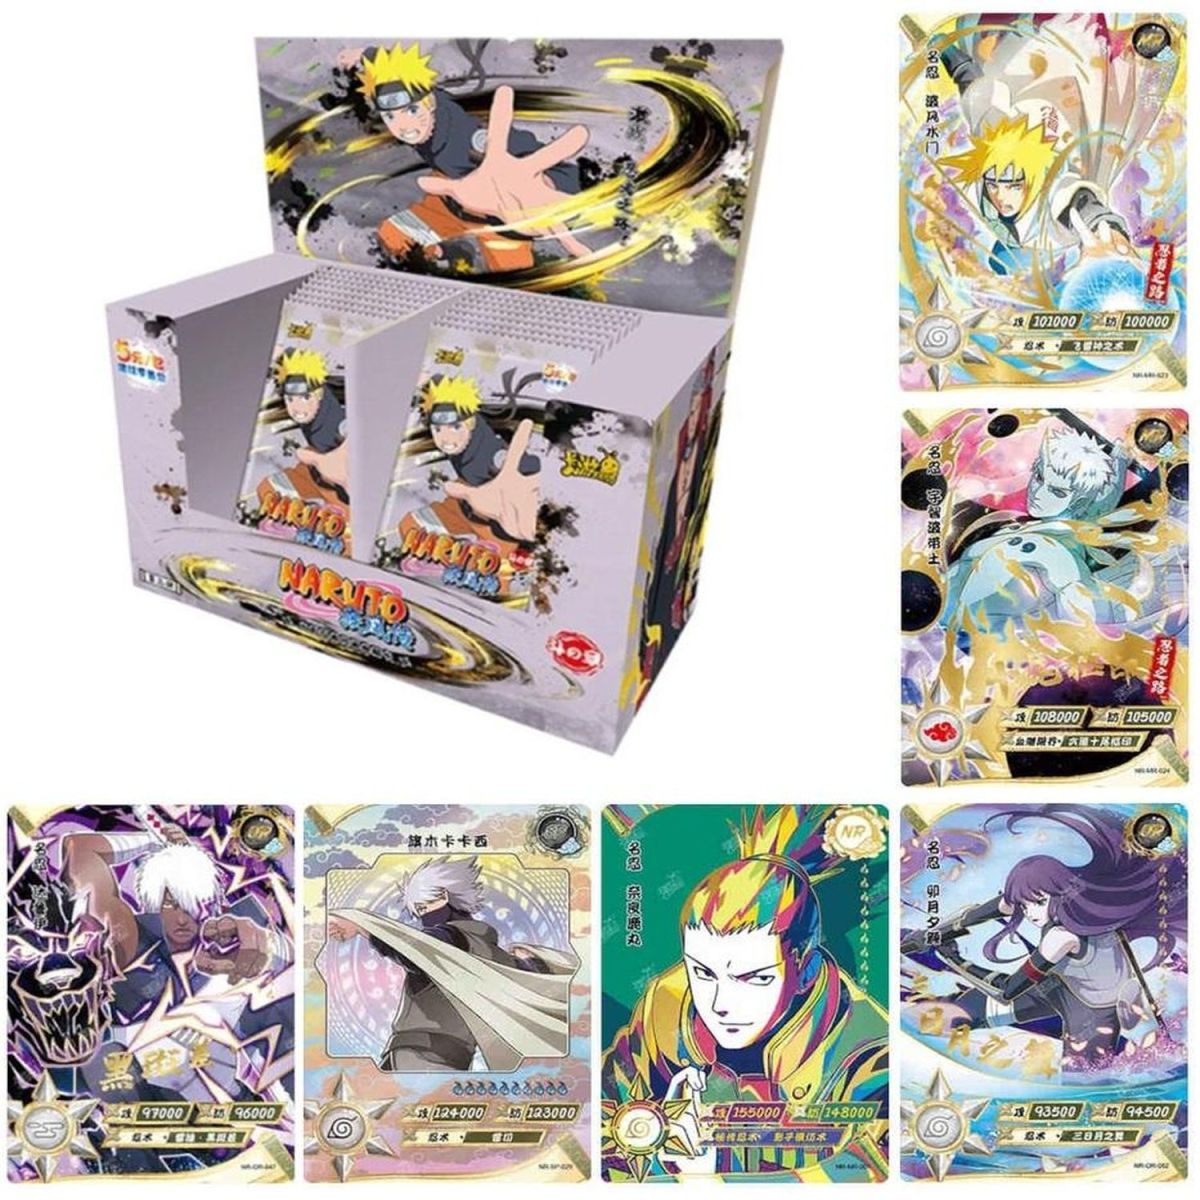 Kayou 110 - Naruto - Box of 20 Boosters - T3W3 Naruto Shippuden TIER 3 WAVE 3 - Chinese